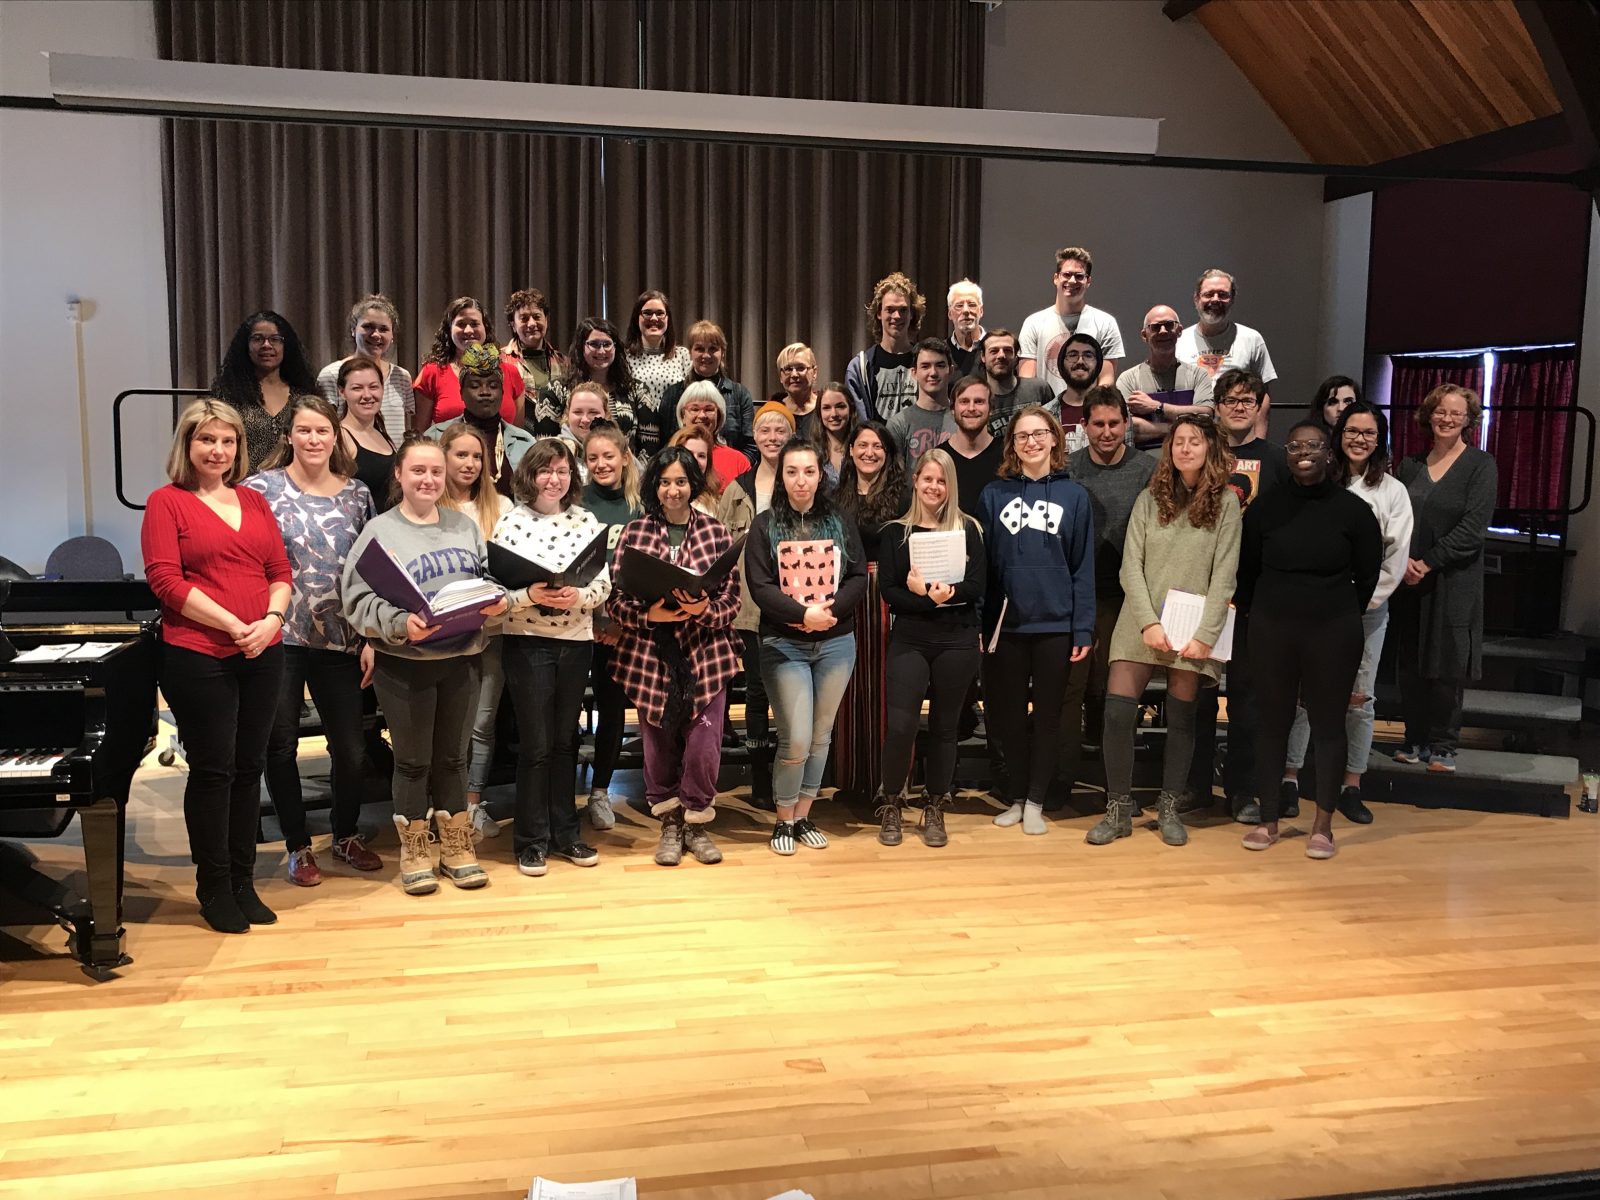 BU Singers hitting 50 years on a high note